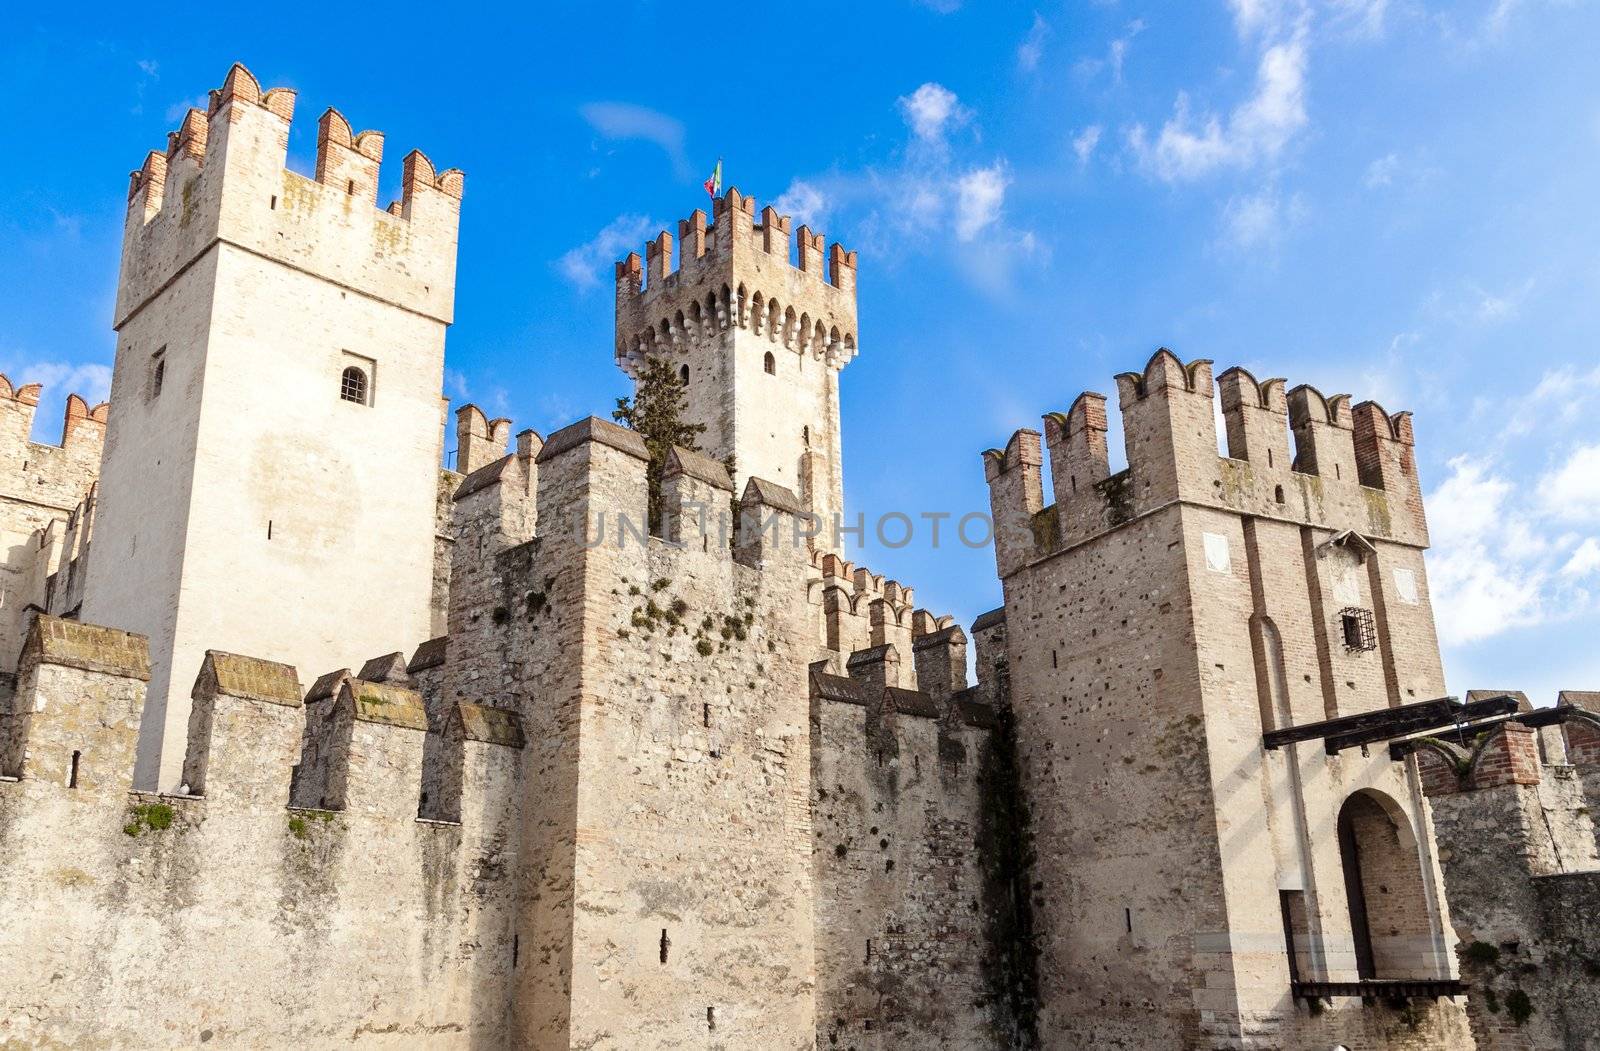 Scaliger Castle in Sirmione, on Lake Garda, is an example of medieval port fortification.